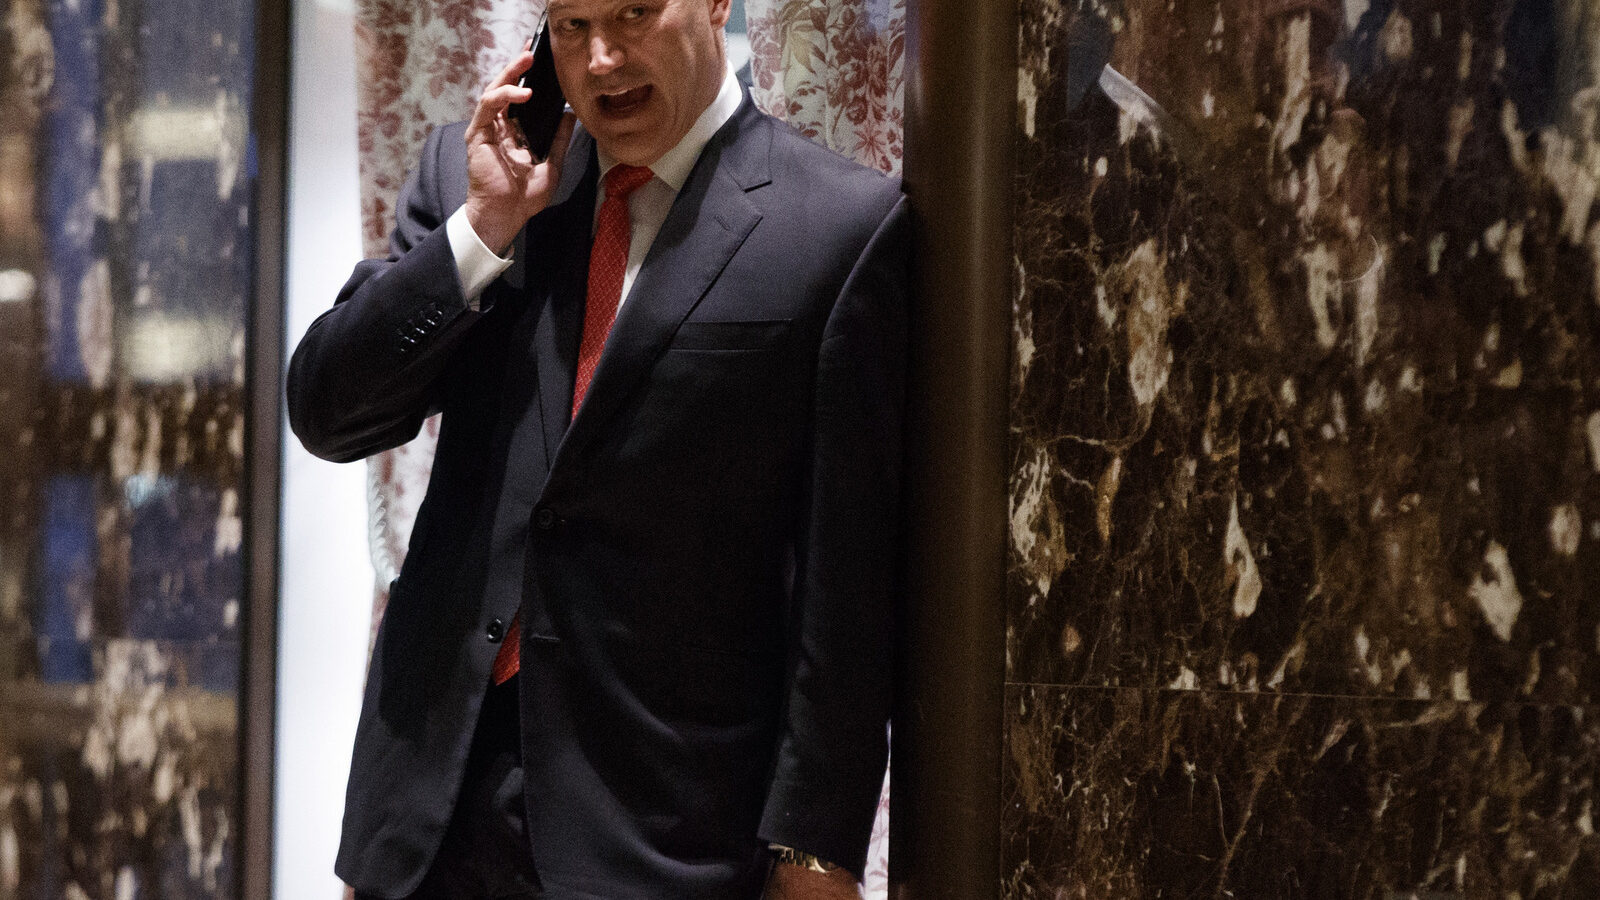 Goldman Sachs COO Gary Cohn talks on the phone as he waits for the start of a meeting with President-elect Donald Trump at Trump Tower, Tuesday, Nov. 29, 2016, in New York. (AP Photo/Evan Vucci)